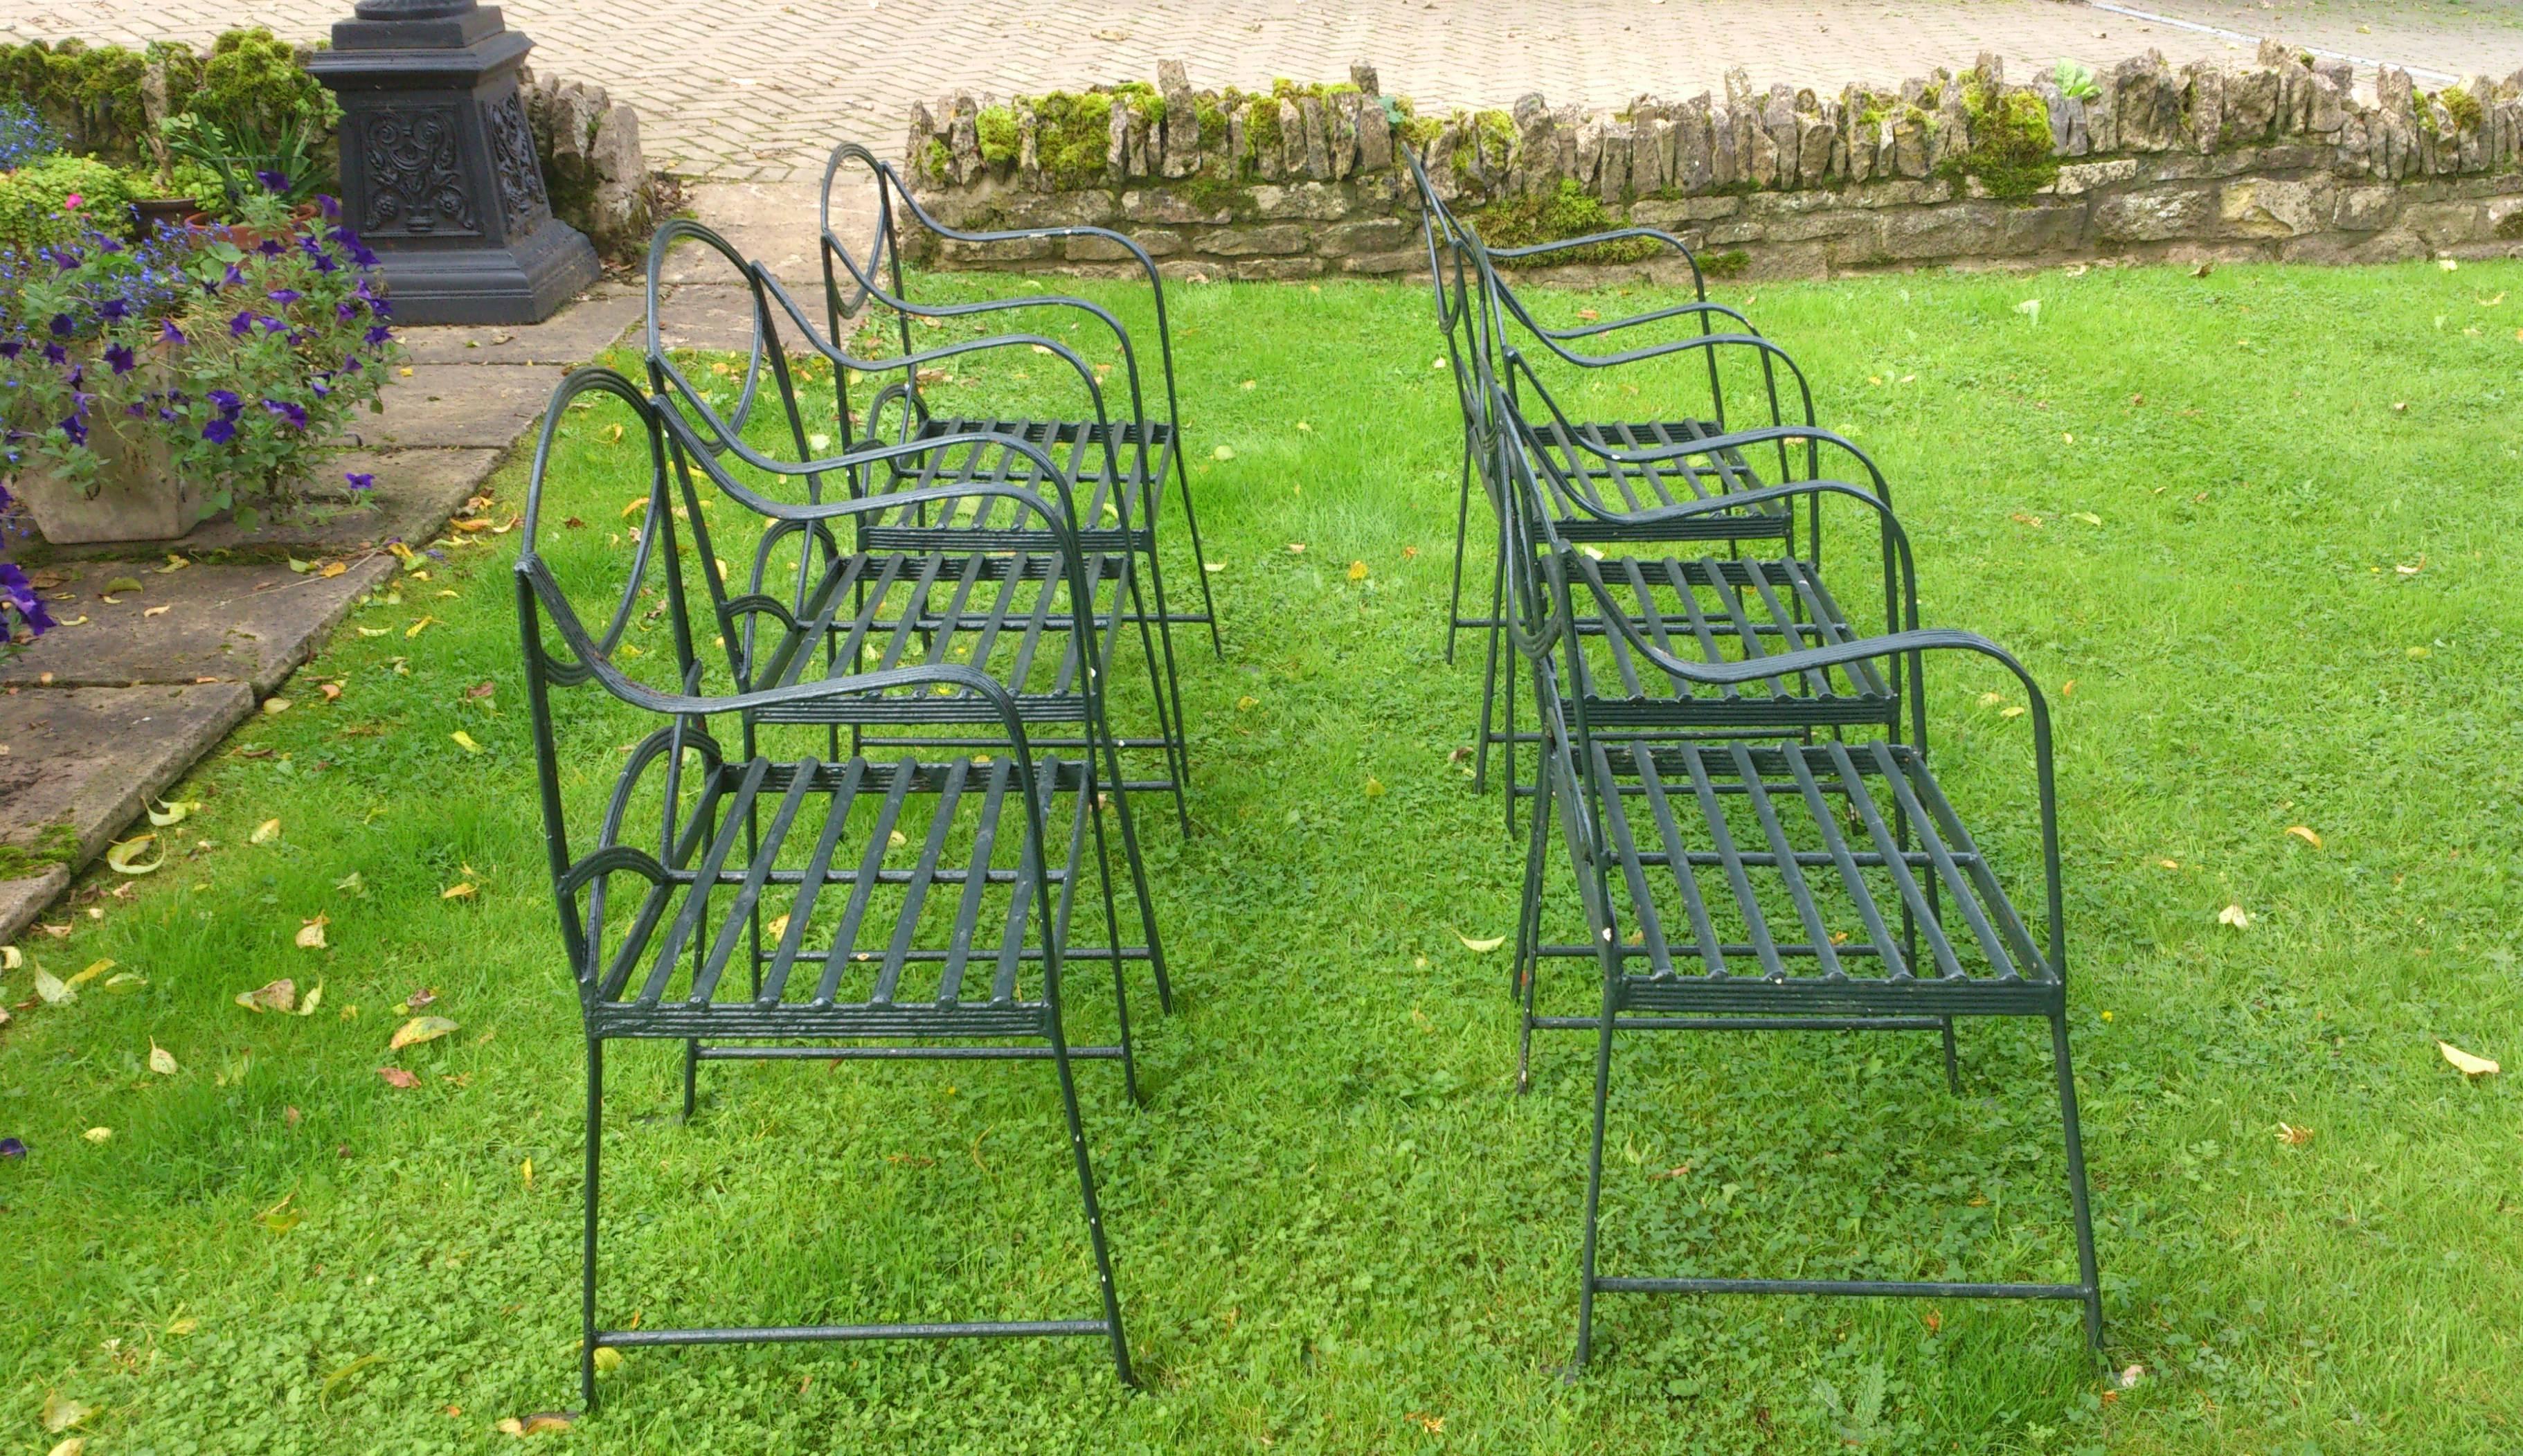 Set of six handmade wrought iron garden chairs in the manner of the Regency period of circa 1815-1820,

English, 20th century 

Measure: 87cm / 34